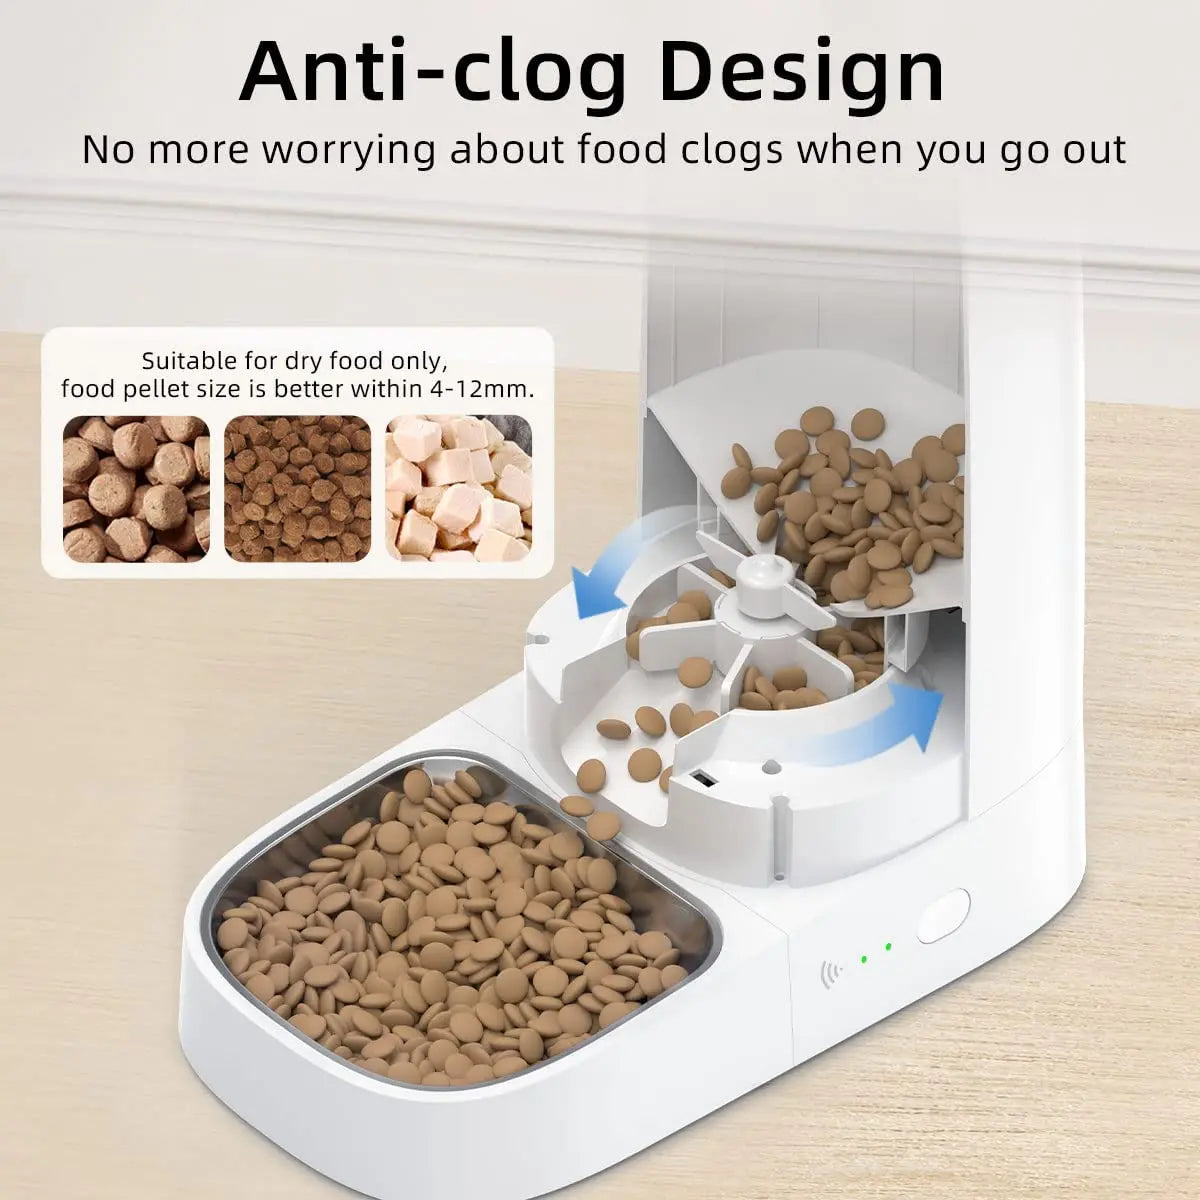 Automatic Cat Feeder Pet Smart WiFi kittens Food Kibble Dispenser Remote Control Auto Feeder For pets and cats Dry Food Accessories, useful  dog feeder